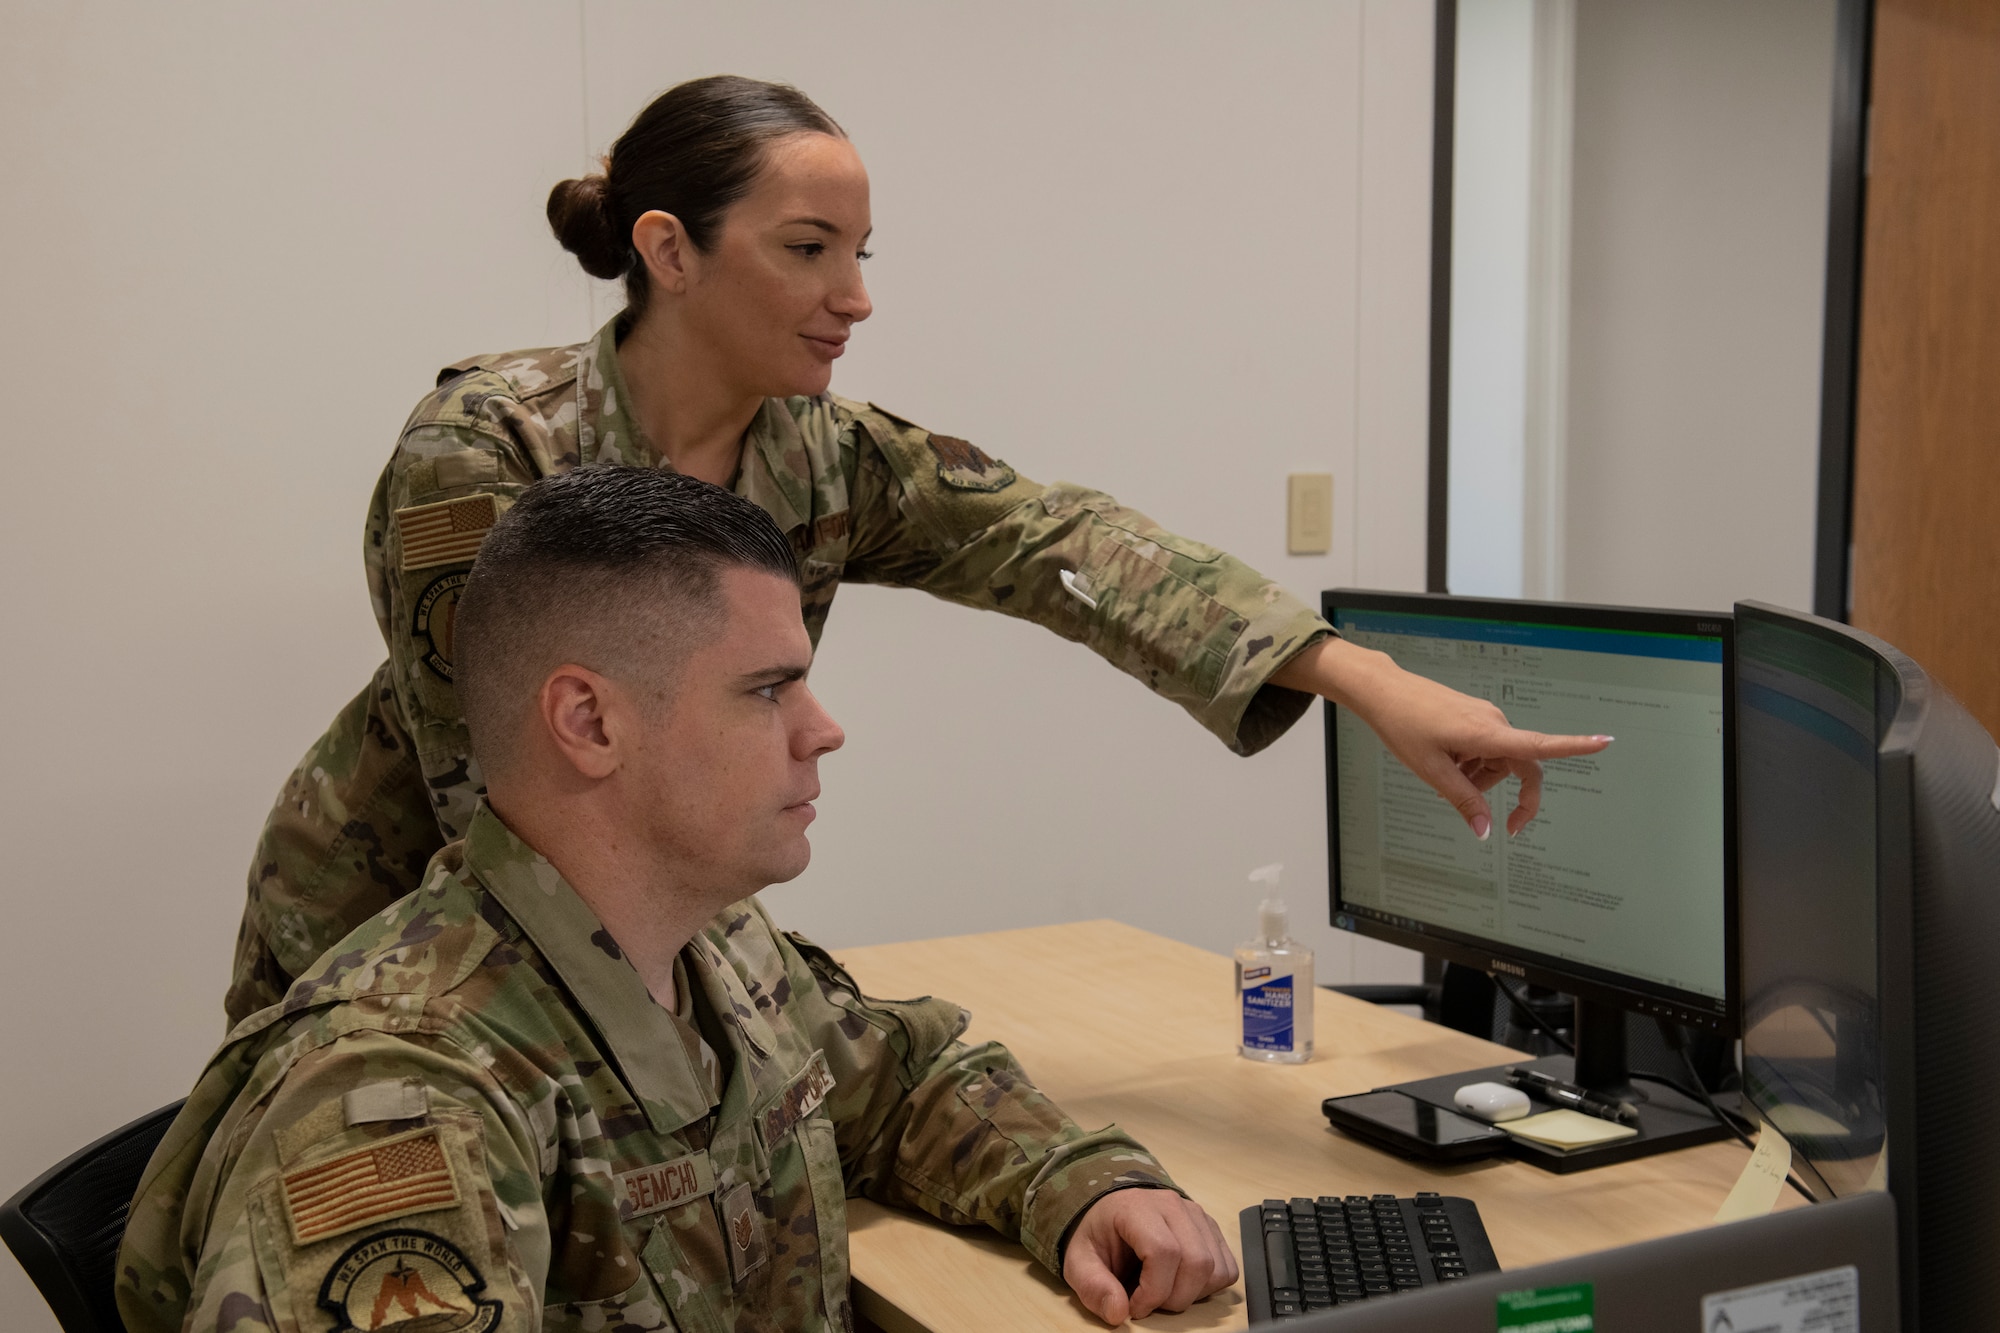 U.S. Air Force Tech. Sgt. Maria Cloherty, 325th Logistics Readiness Squadron unit deployment manager, back, shows Tech. Sgt. Robert Semcho, 325th LRS UDM, a feature on the Commander Toolkit, a web-based program used to track unit readiness, at Tyndall Air Force Base, Florida, July 15, 2022. UDMs use the CC Toolkit to ensure their unit is deployment ready, including annual training, medical appointments and physical fitness assessments. (U.S. Air Force photo by Staff Sgt. Cheyenne Lewis)